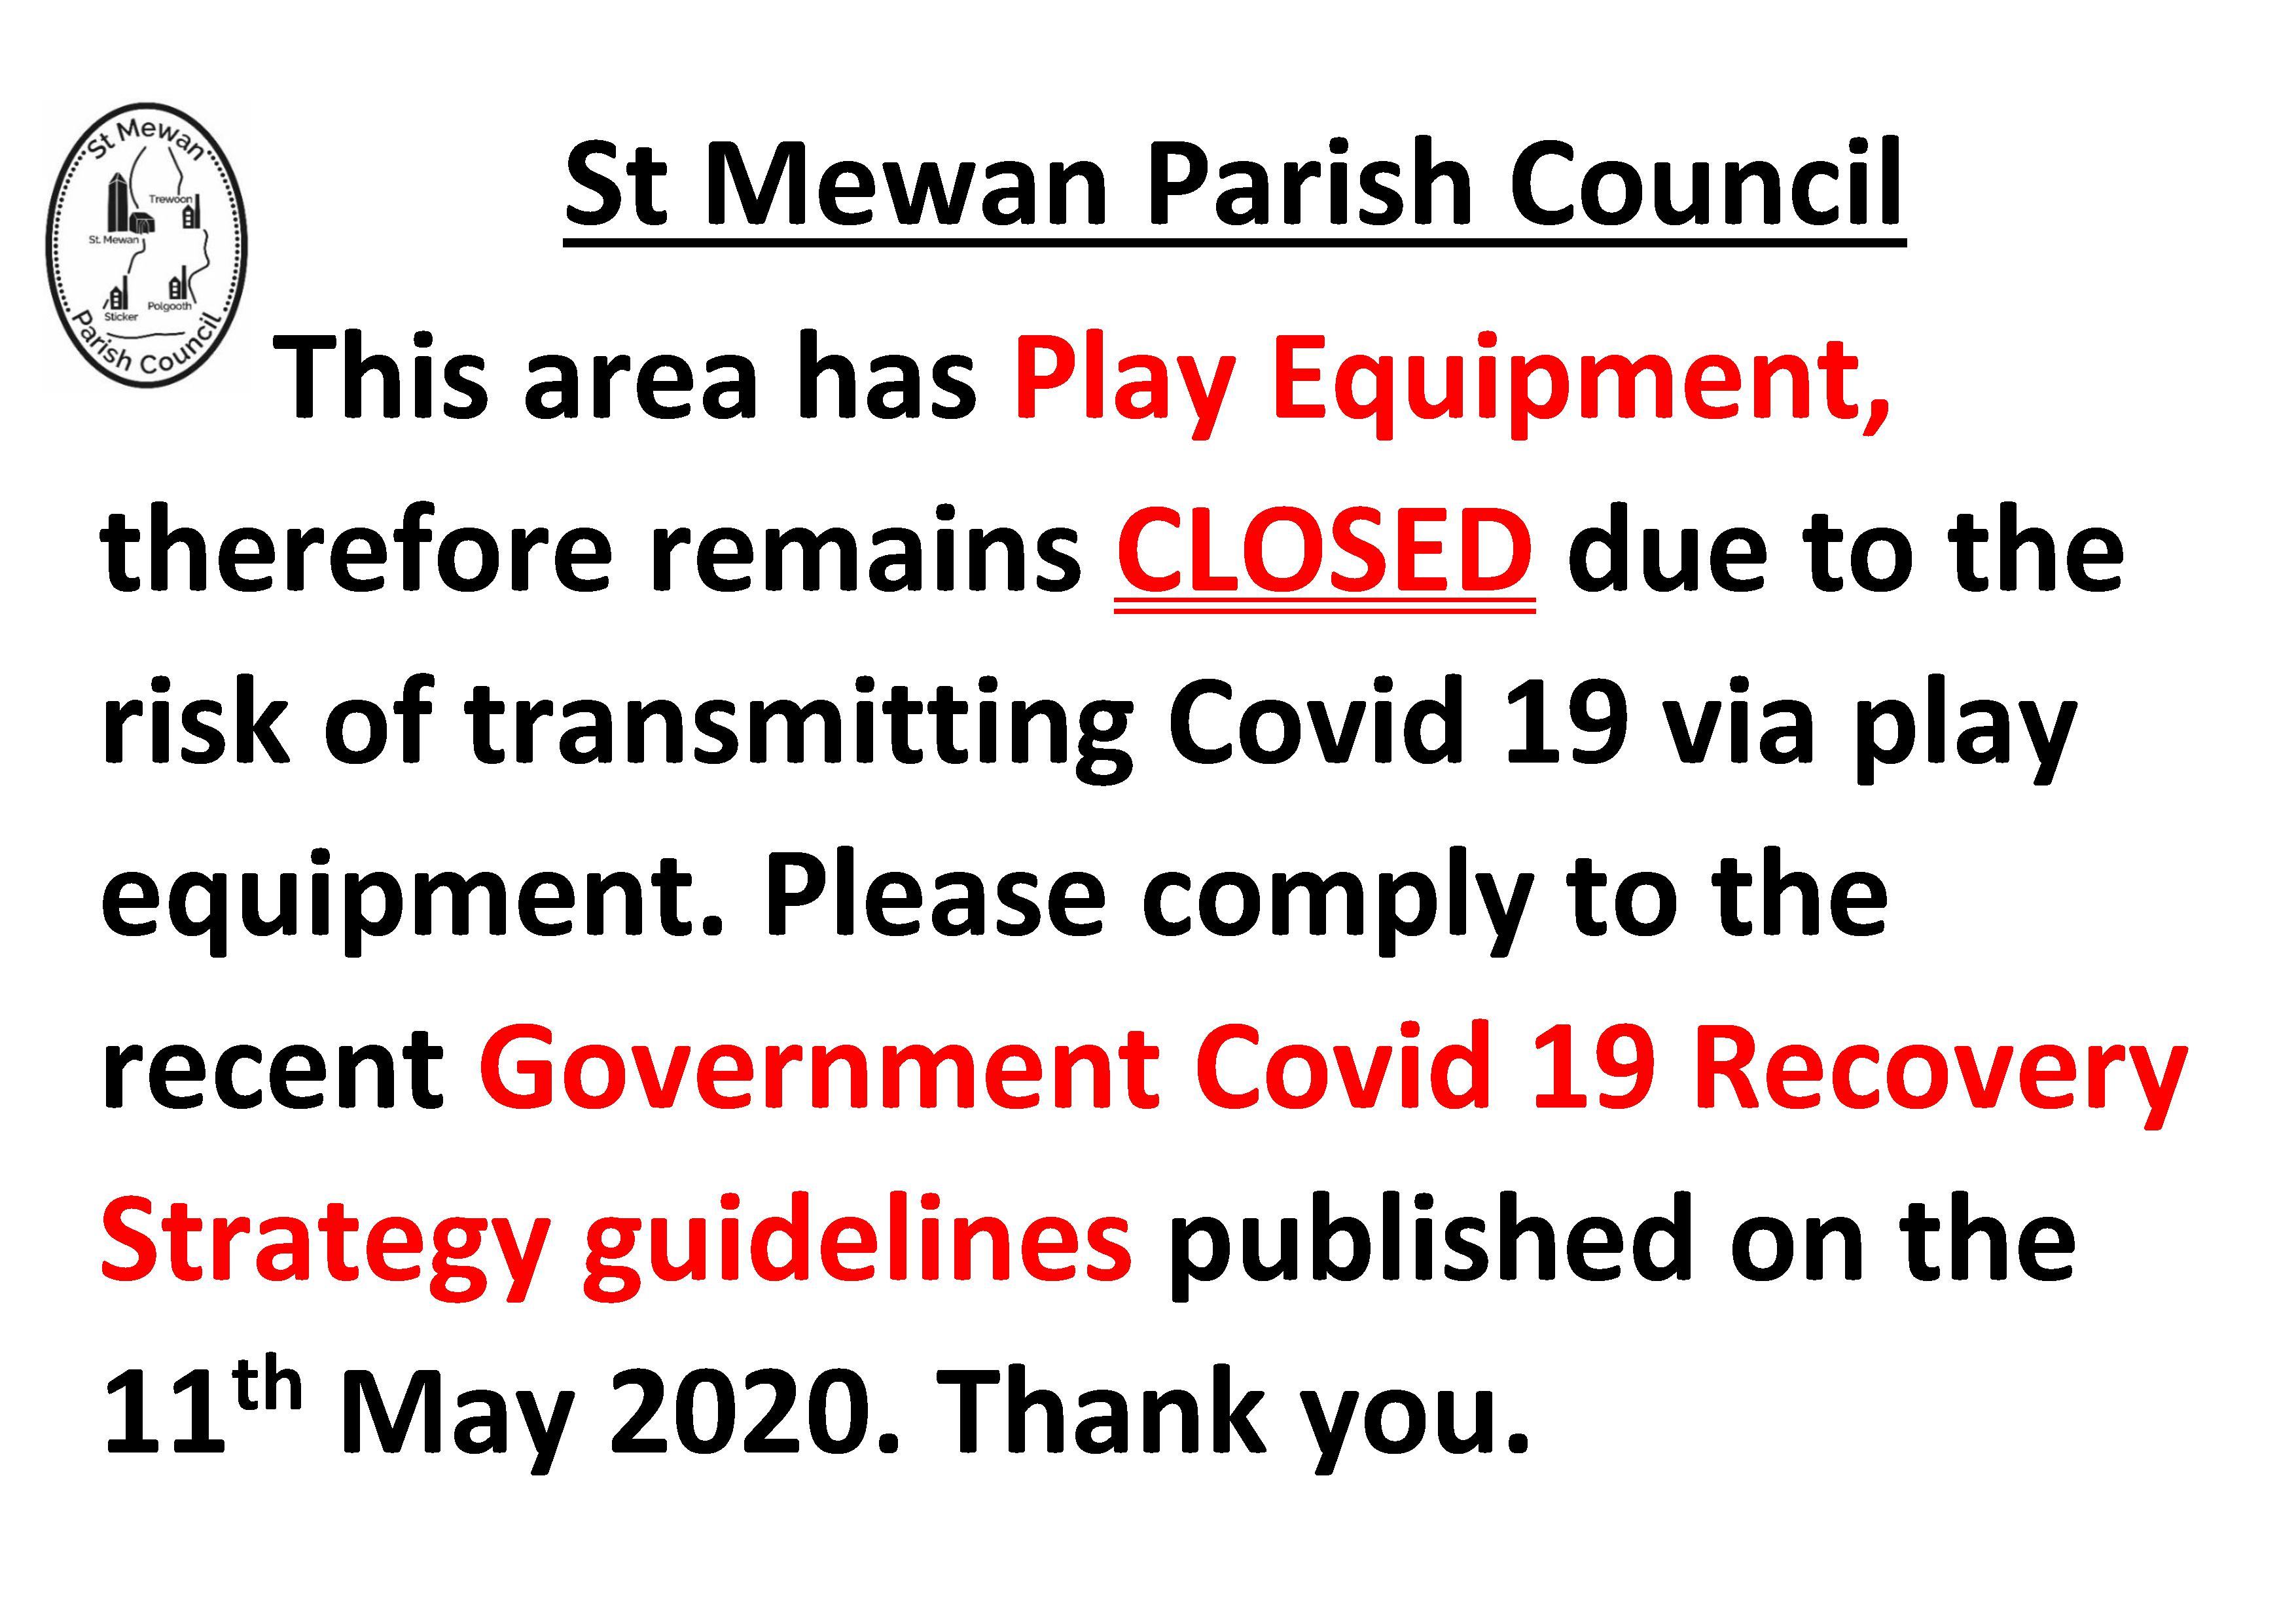  Areas with play equipment still remains CLOSED!